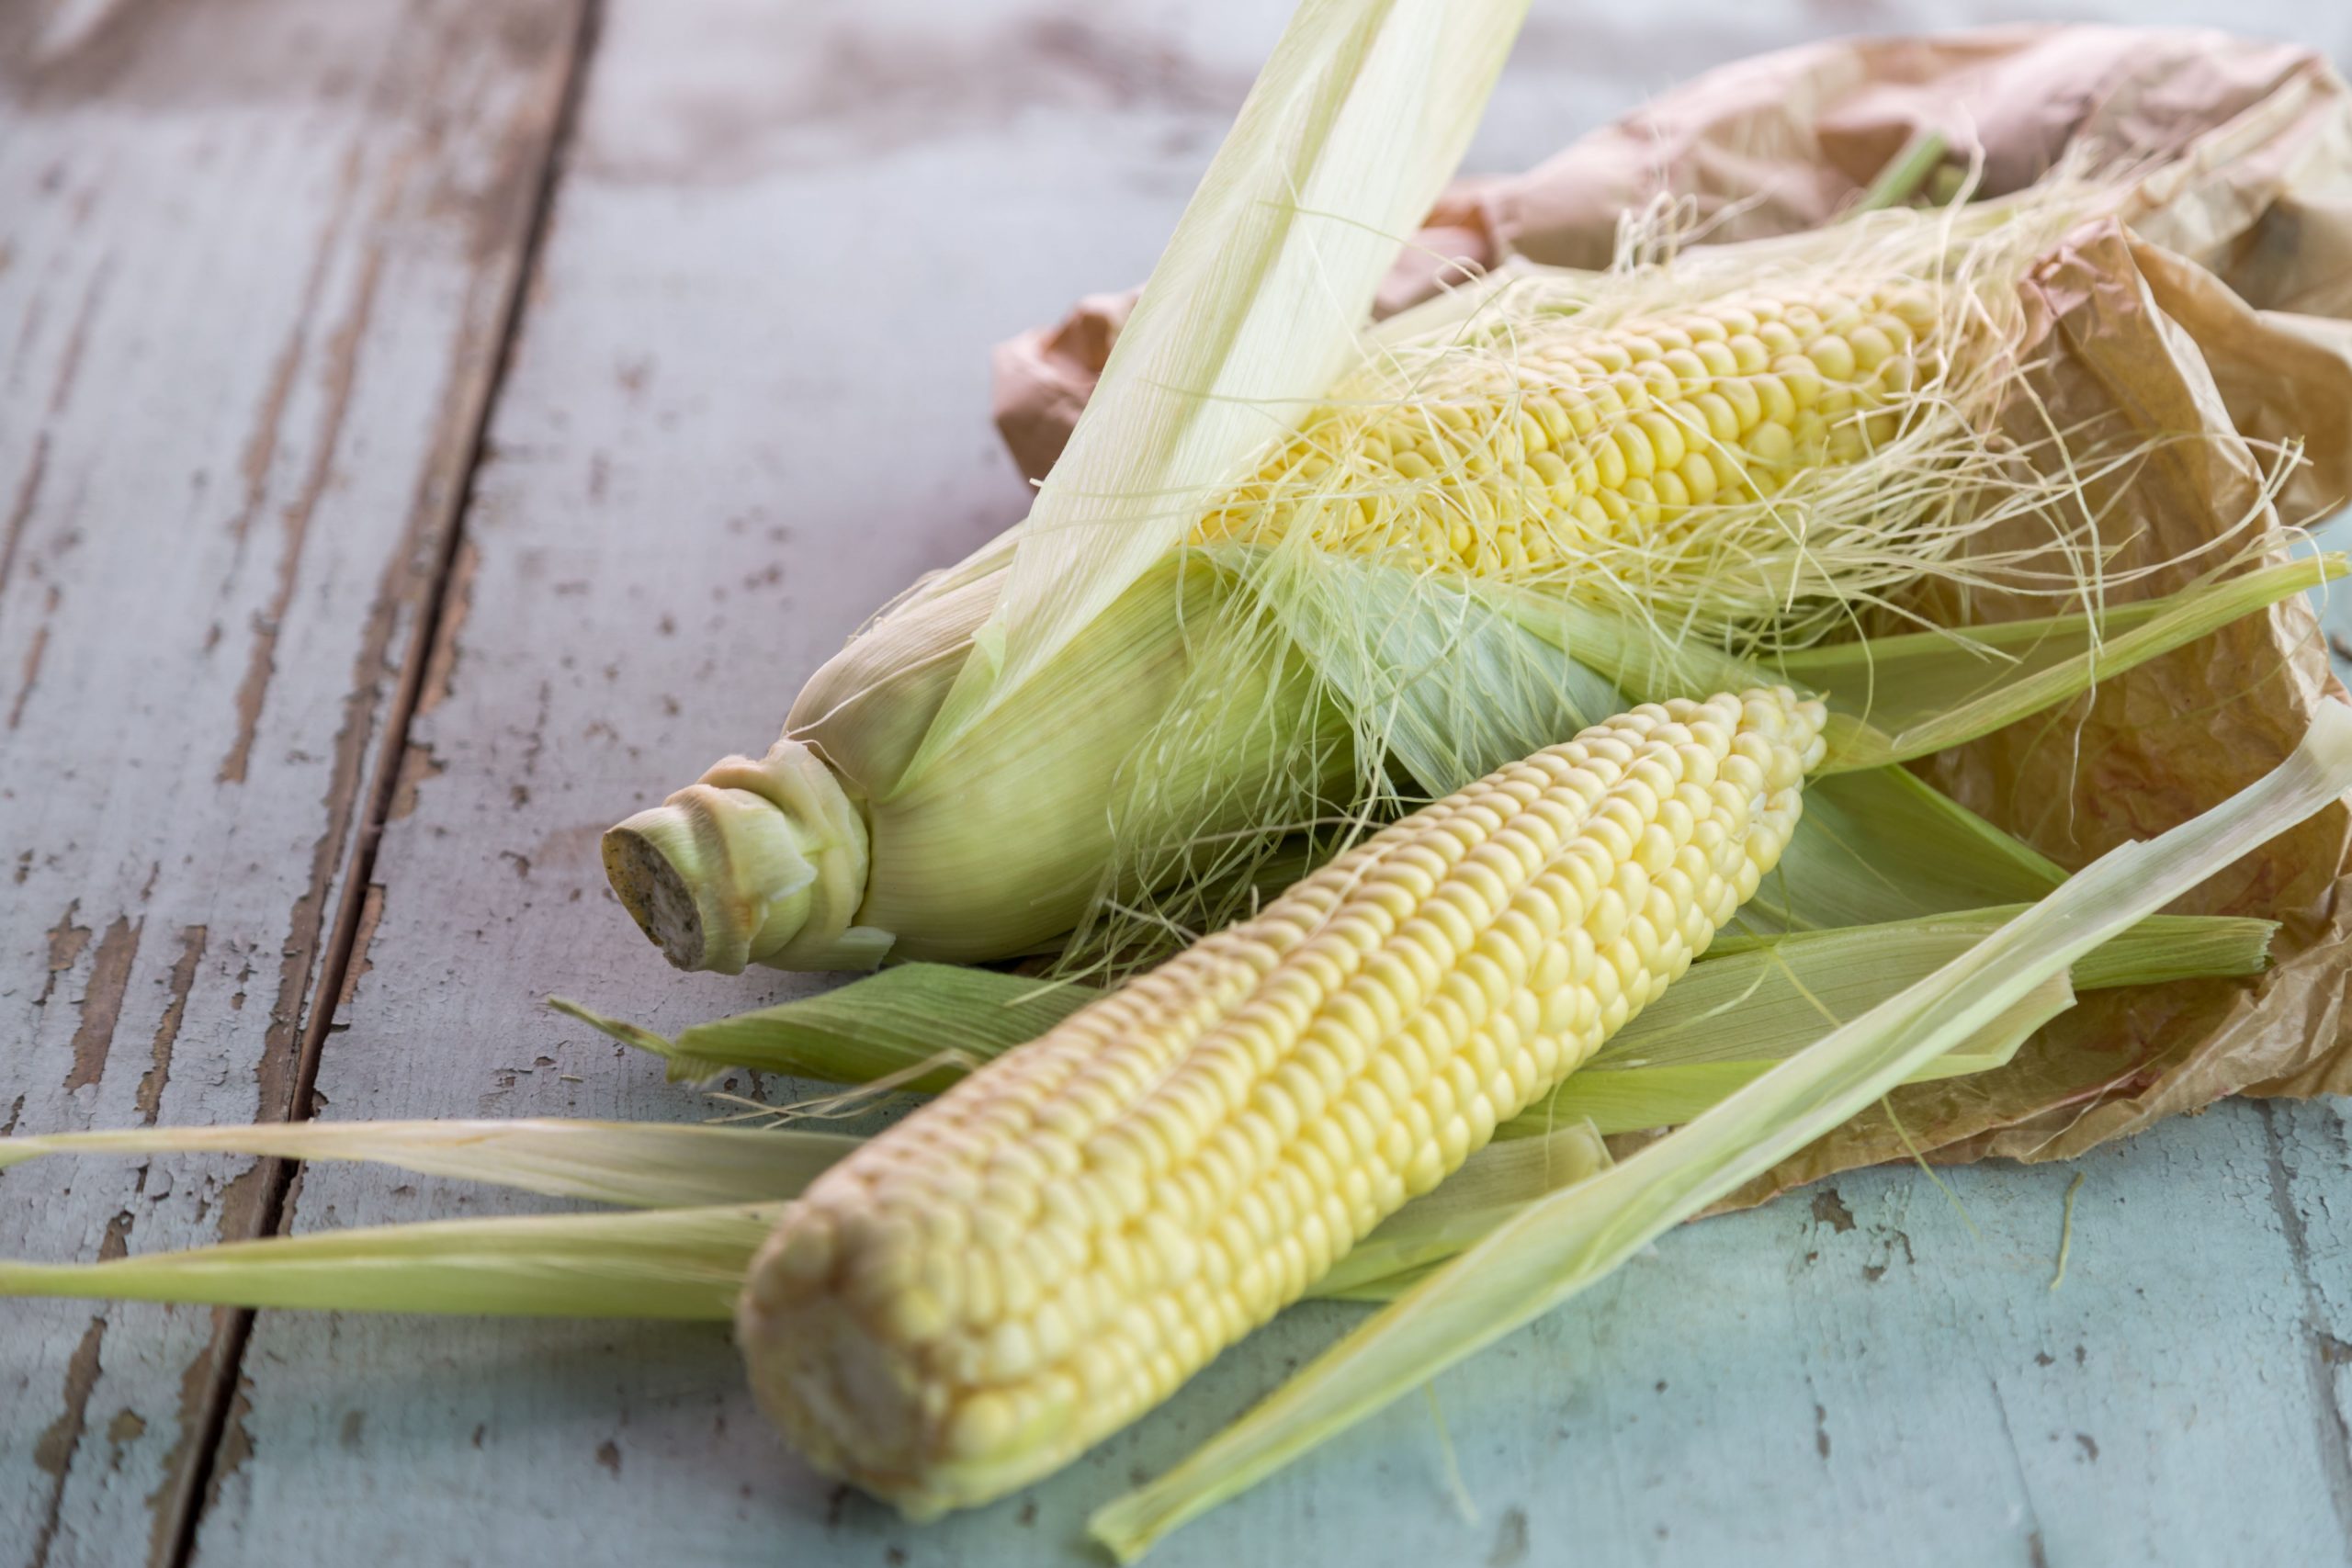 How to Shuck Corn With Ease